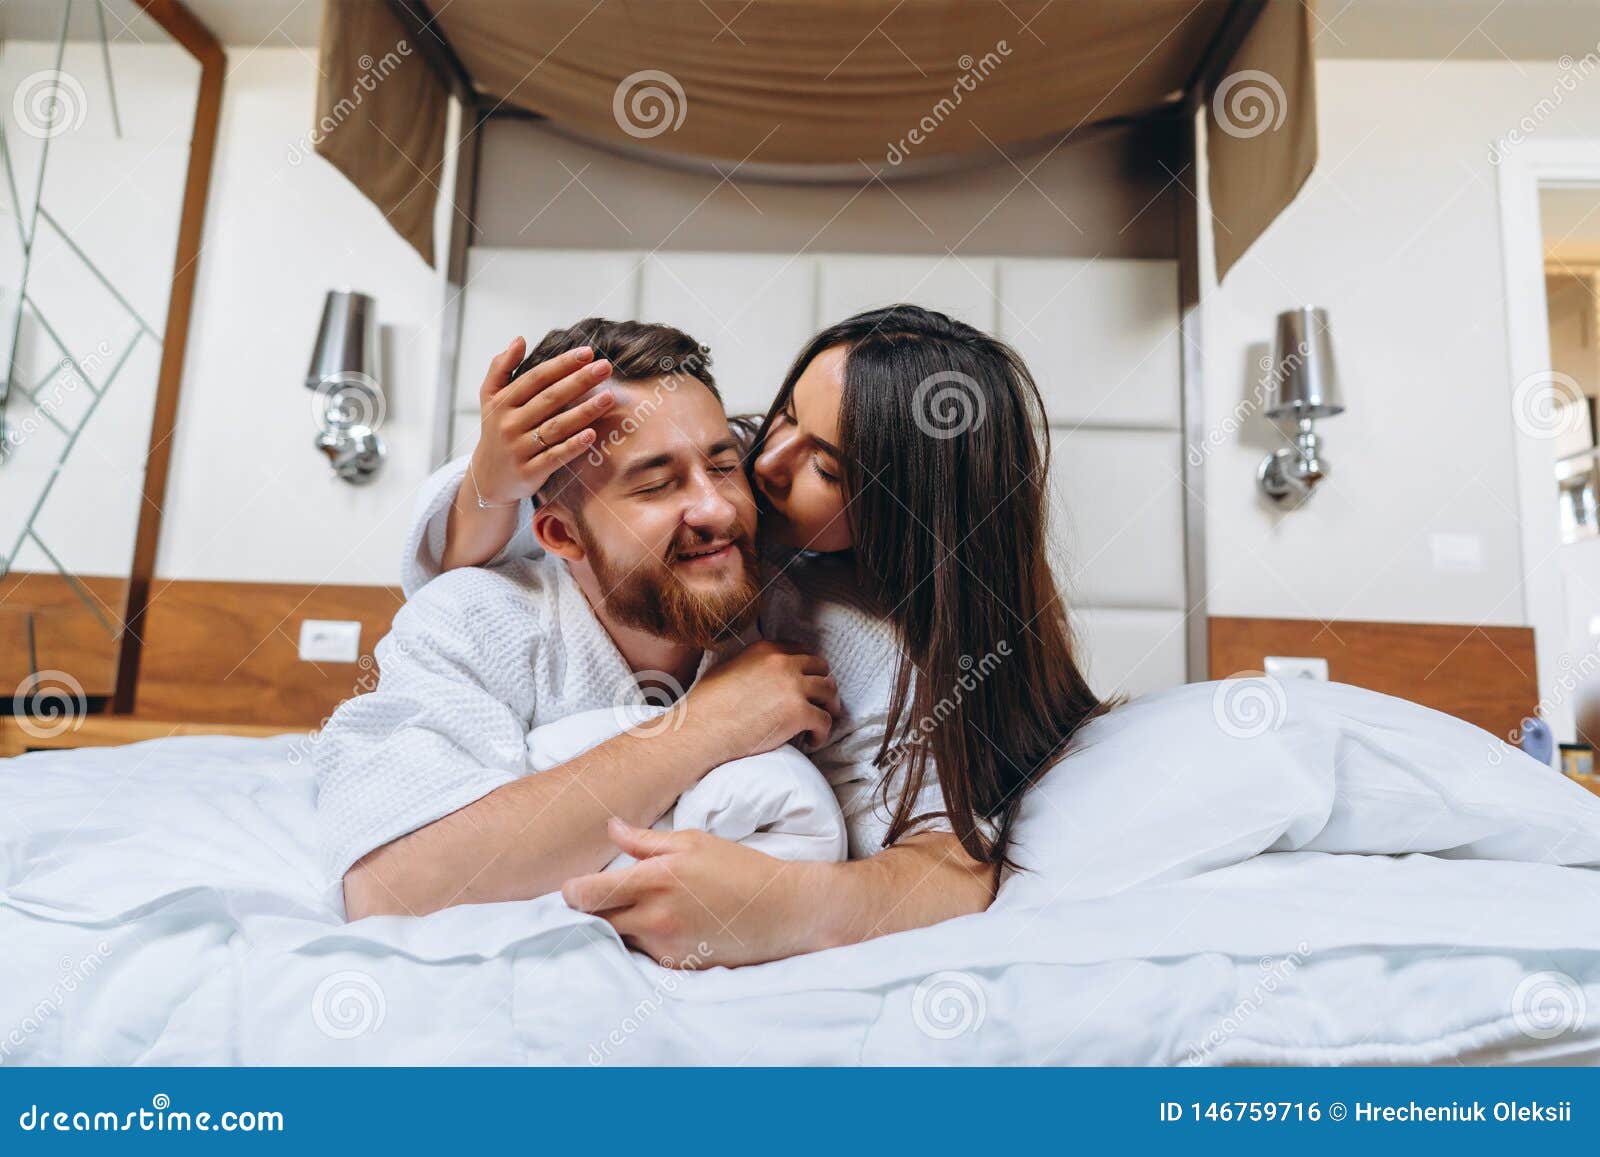 Picture Showing Happy Couple Resting In Hotel Room Stock Photo Image